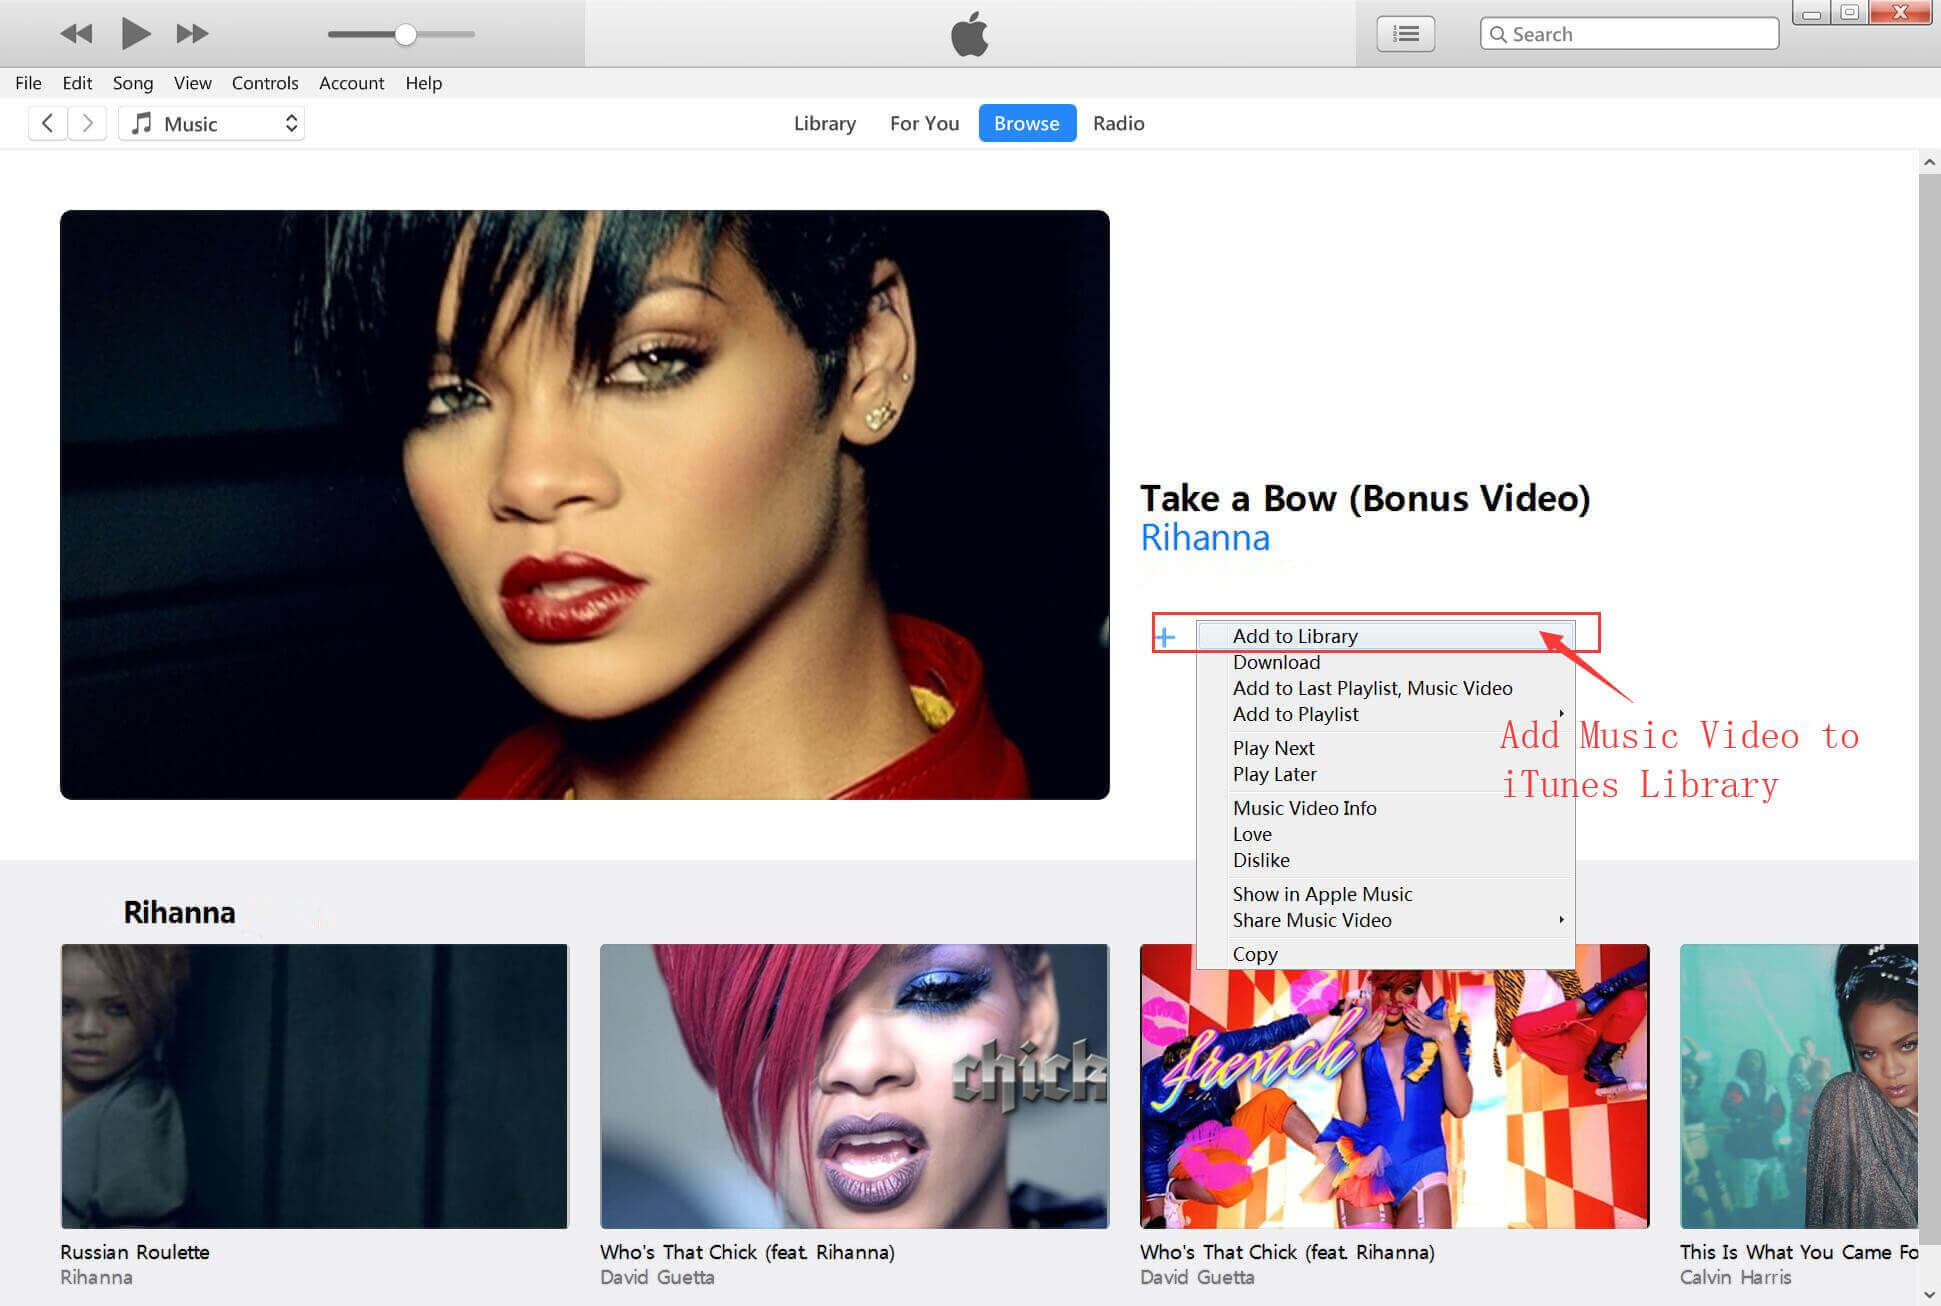 add itunes music video to library